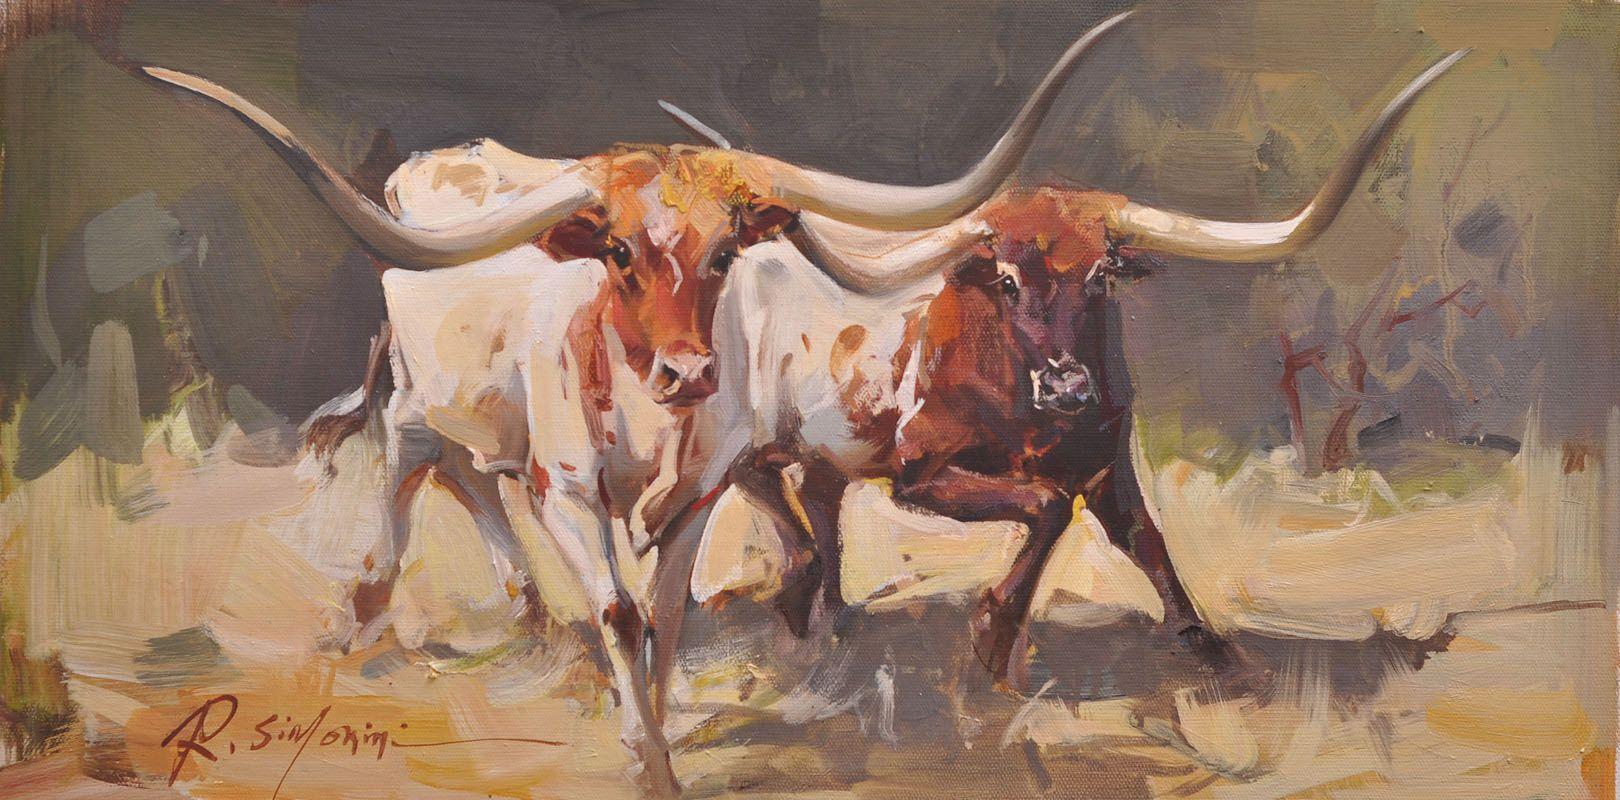 This painting by artist Ray Simonini titled "Long Horn" is a 12x24 oil painting on canvas featuring a portrait of a white and brown longhorns running in a field.

About the artist:
Simonini was born in China in 1981. He became intrigued by